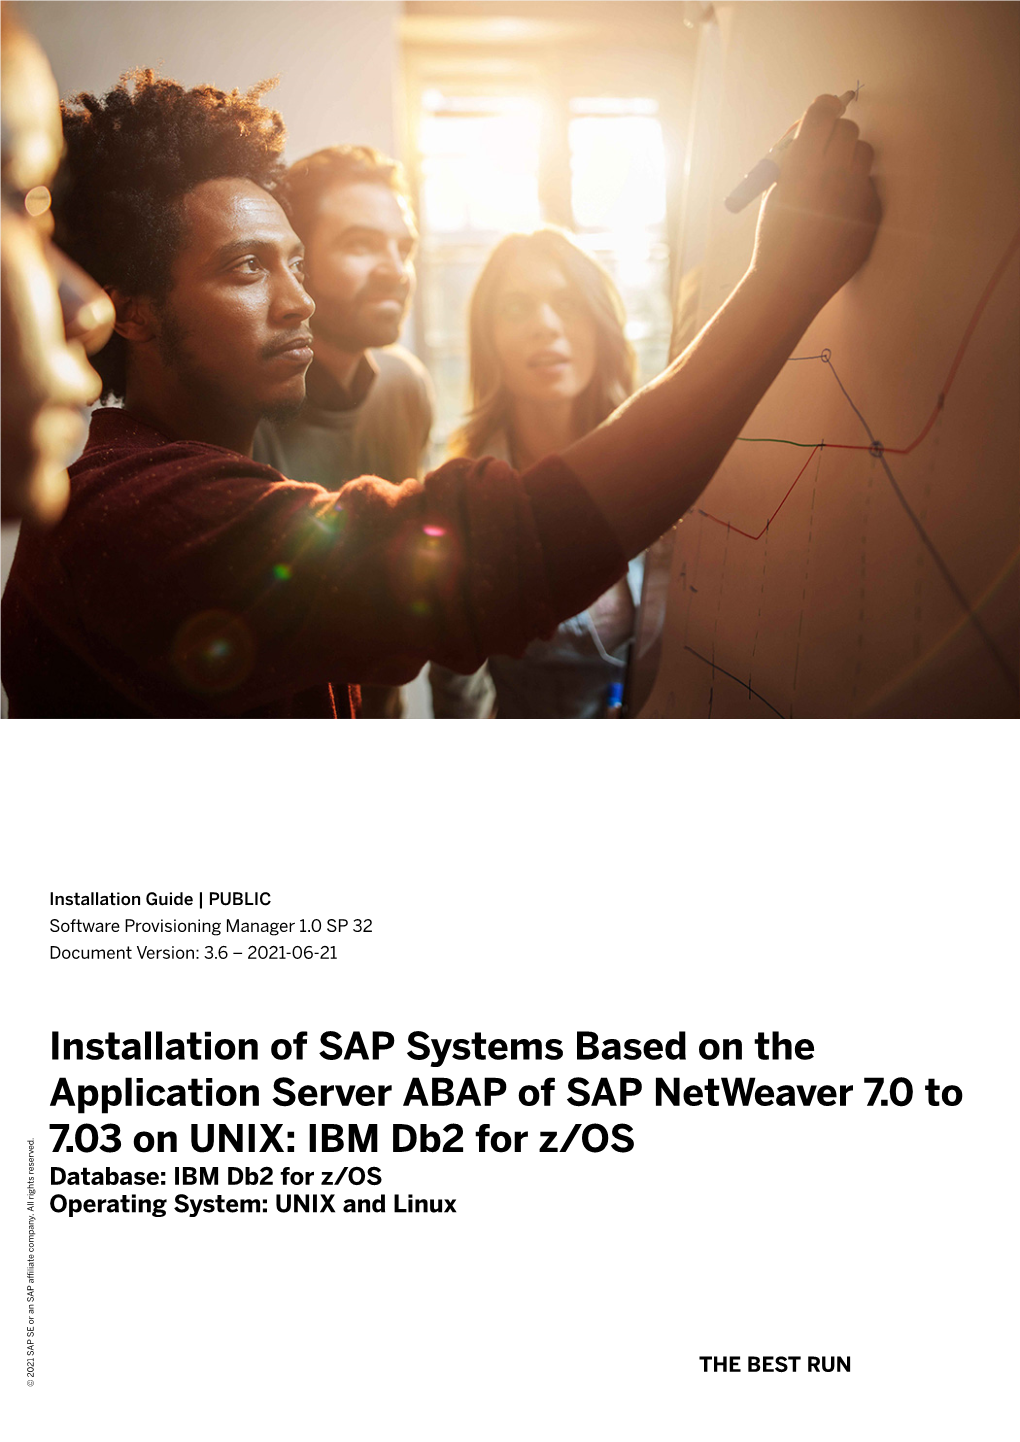 Installation of SAP Systems Based on the Application Server ABAP of SAP